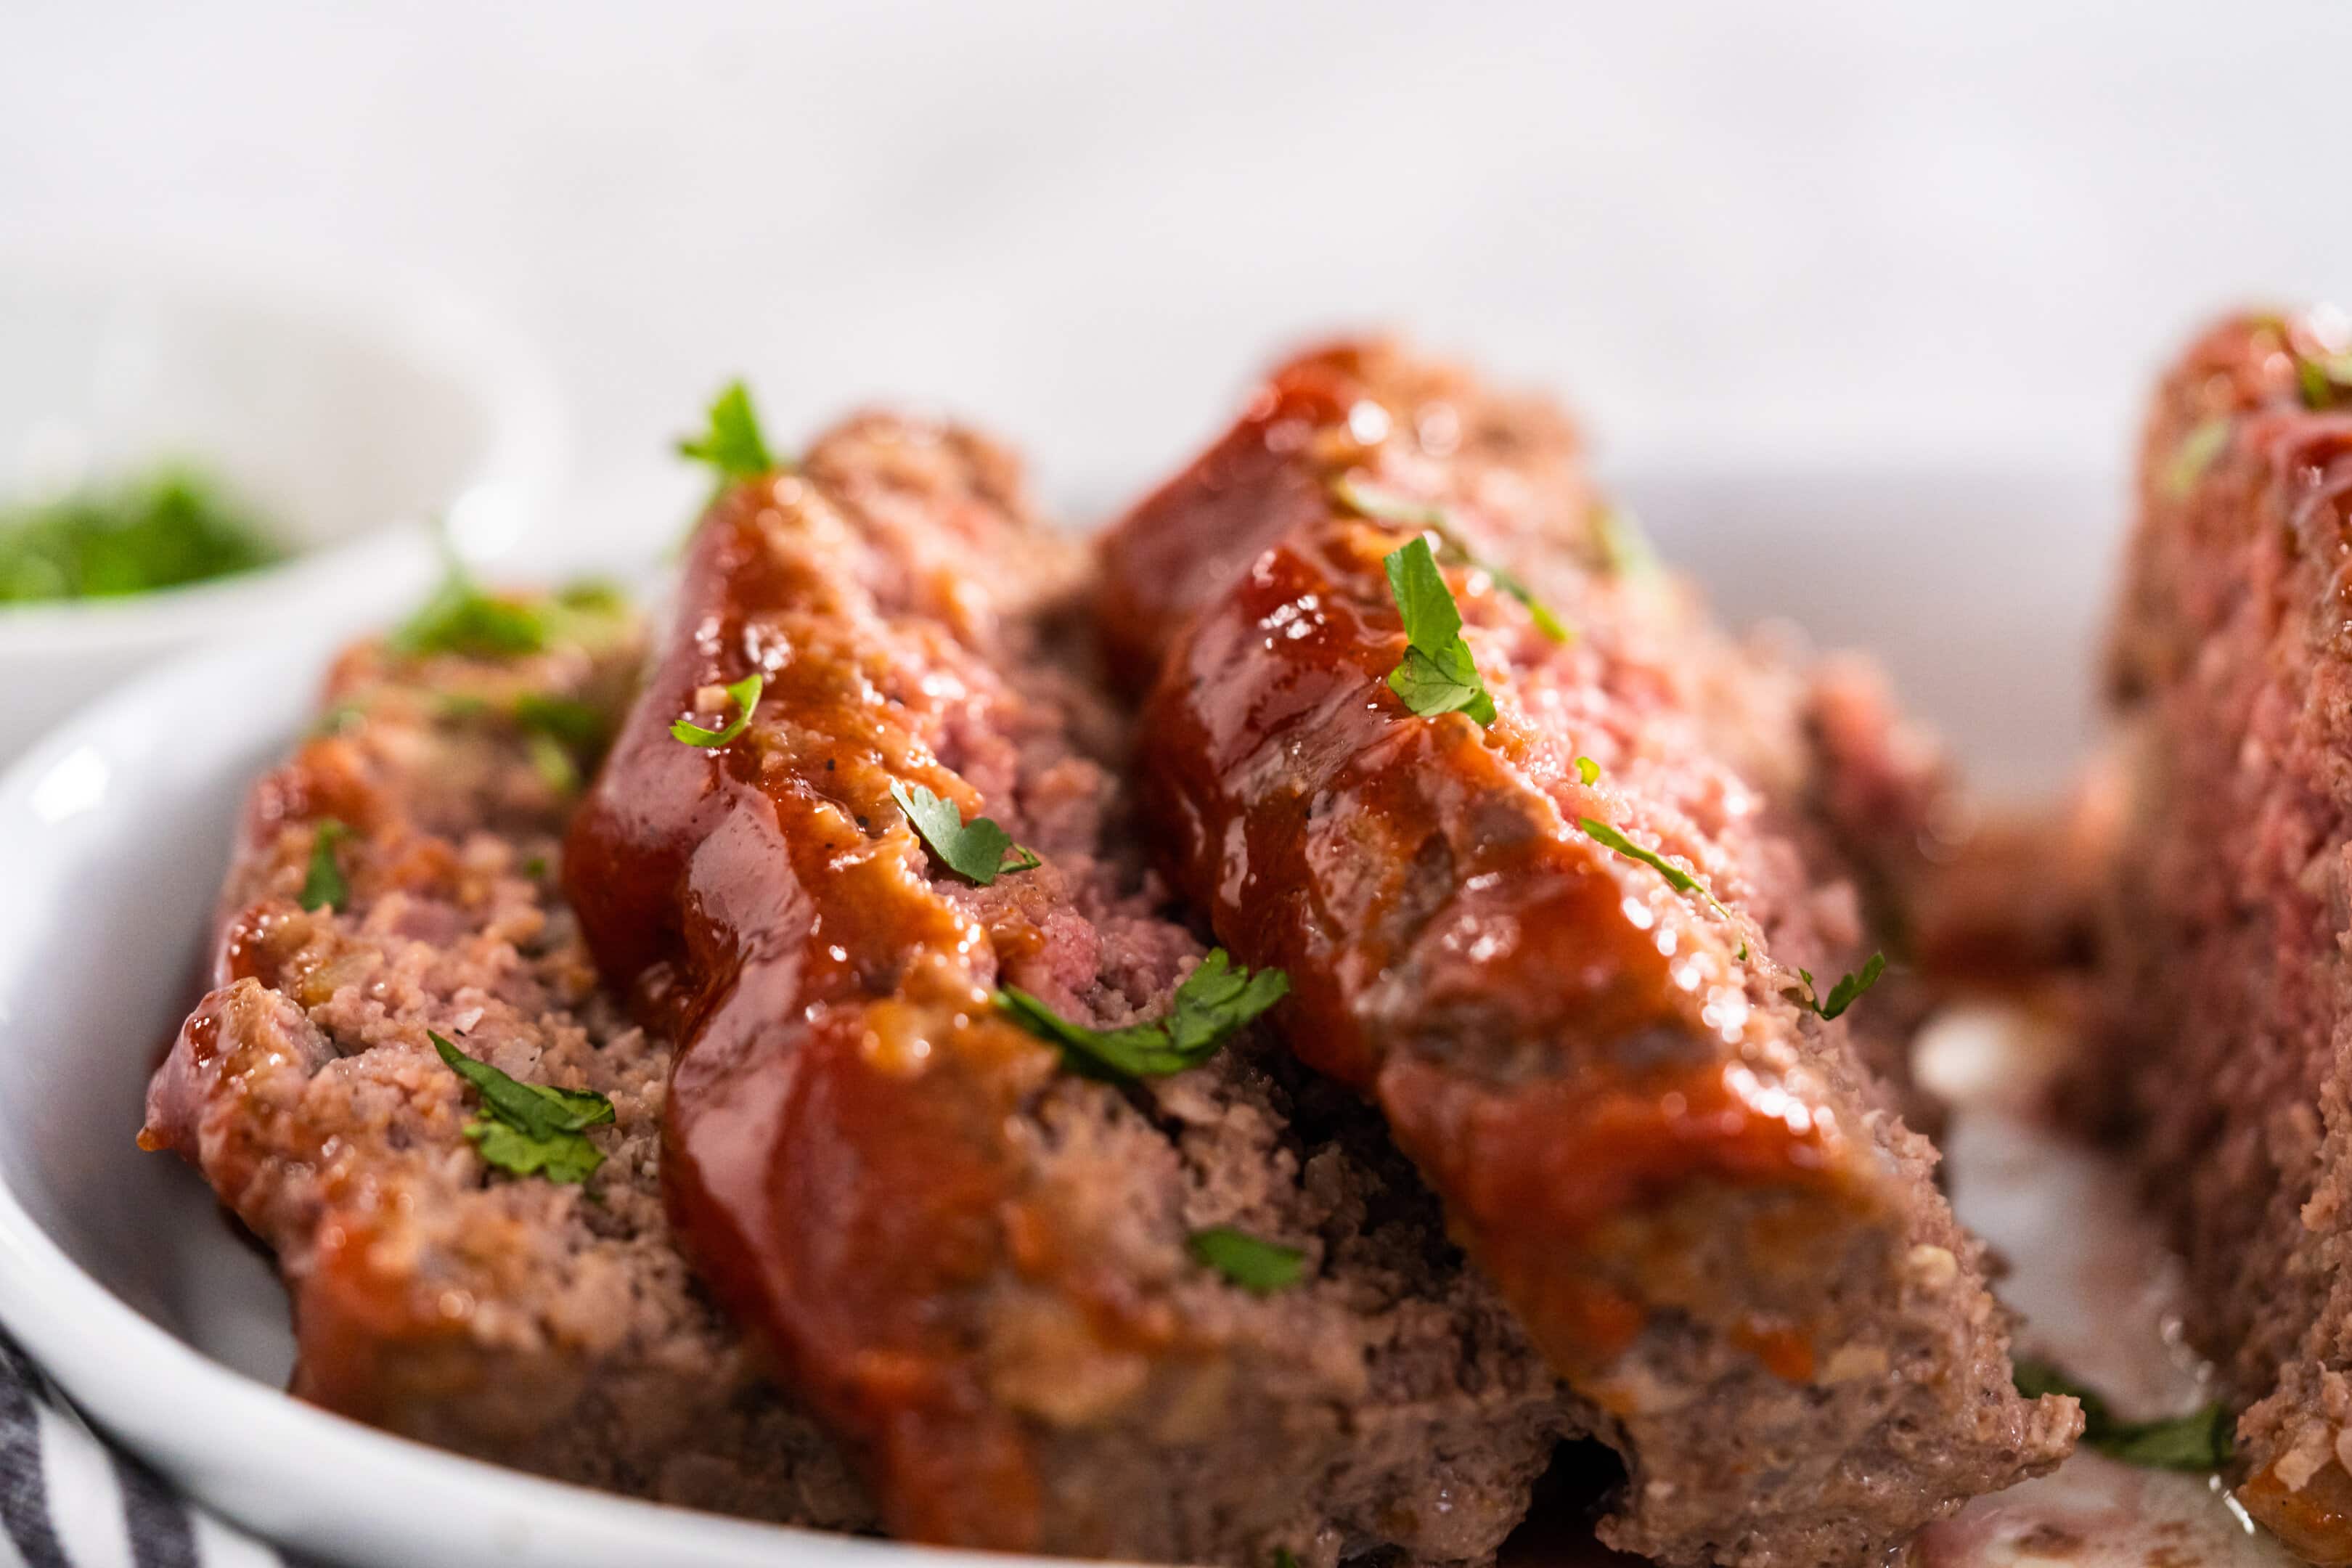 Classic Joanna Gaines meatloaf with a sweet glaze